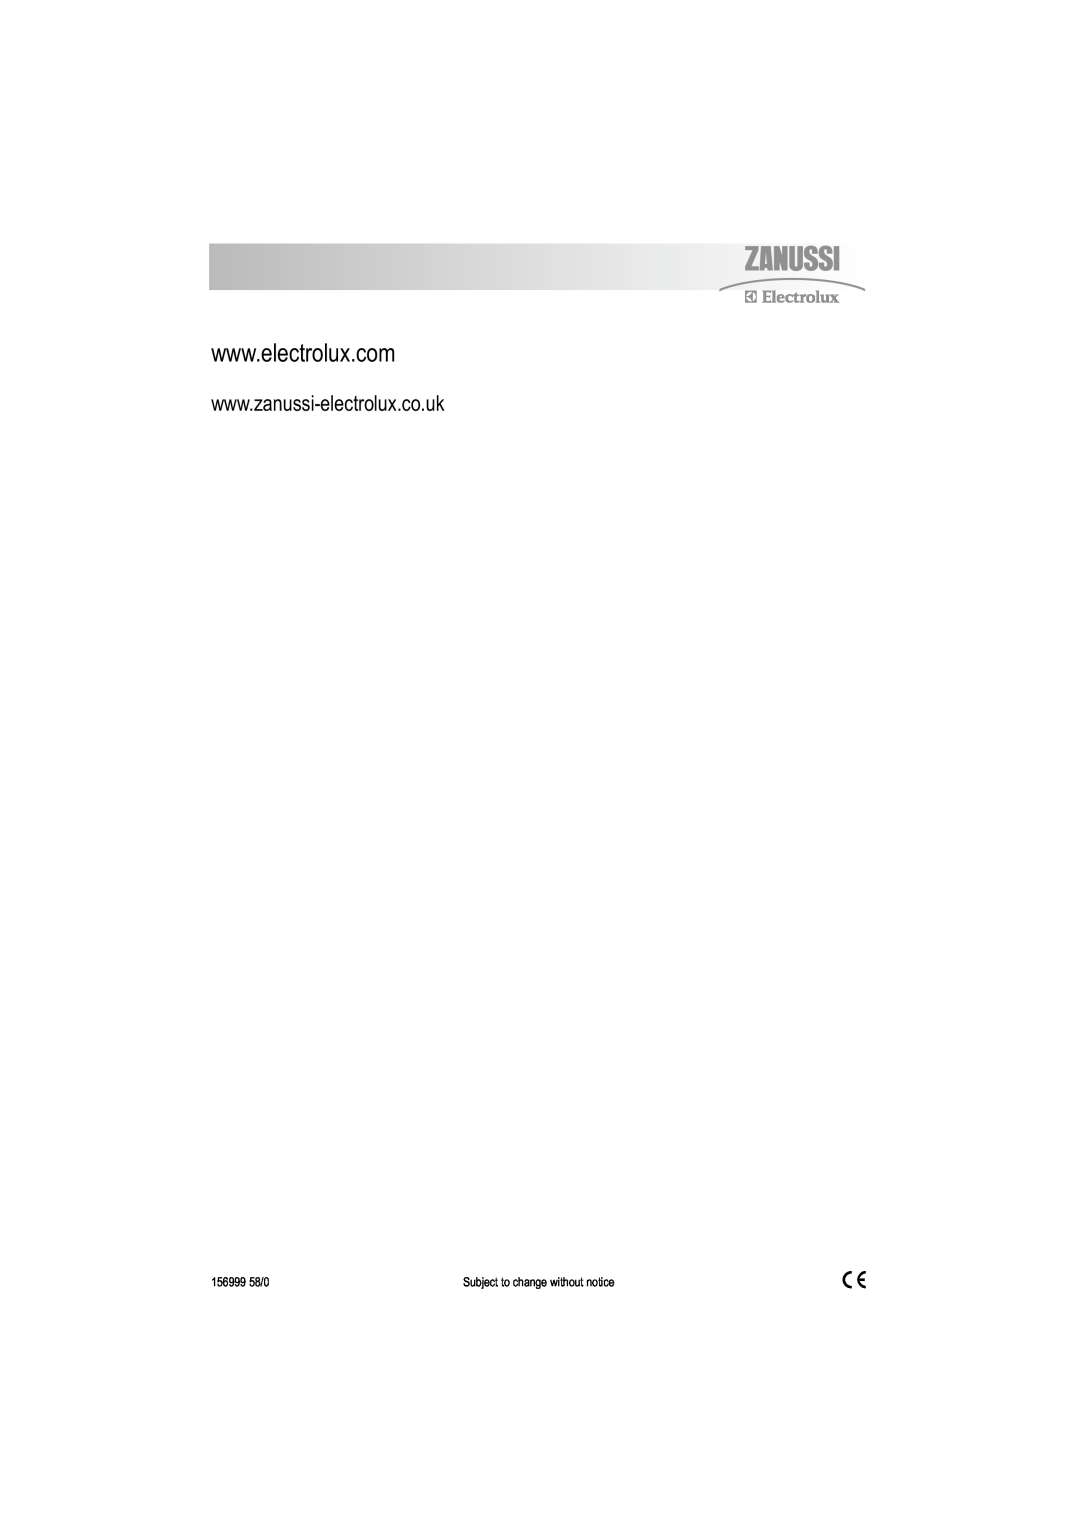 Electrolux ZDF 501 user manual 156999 58/0, Subject to change without notice 